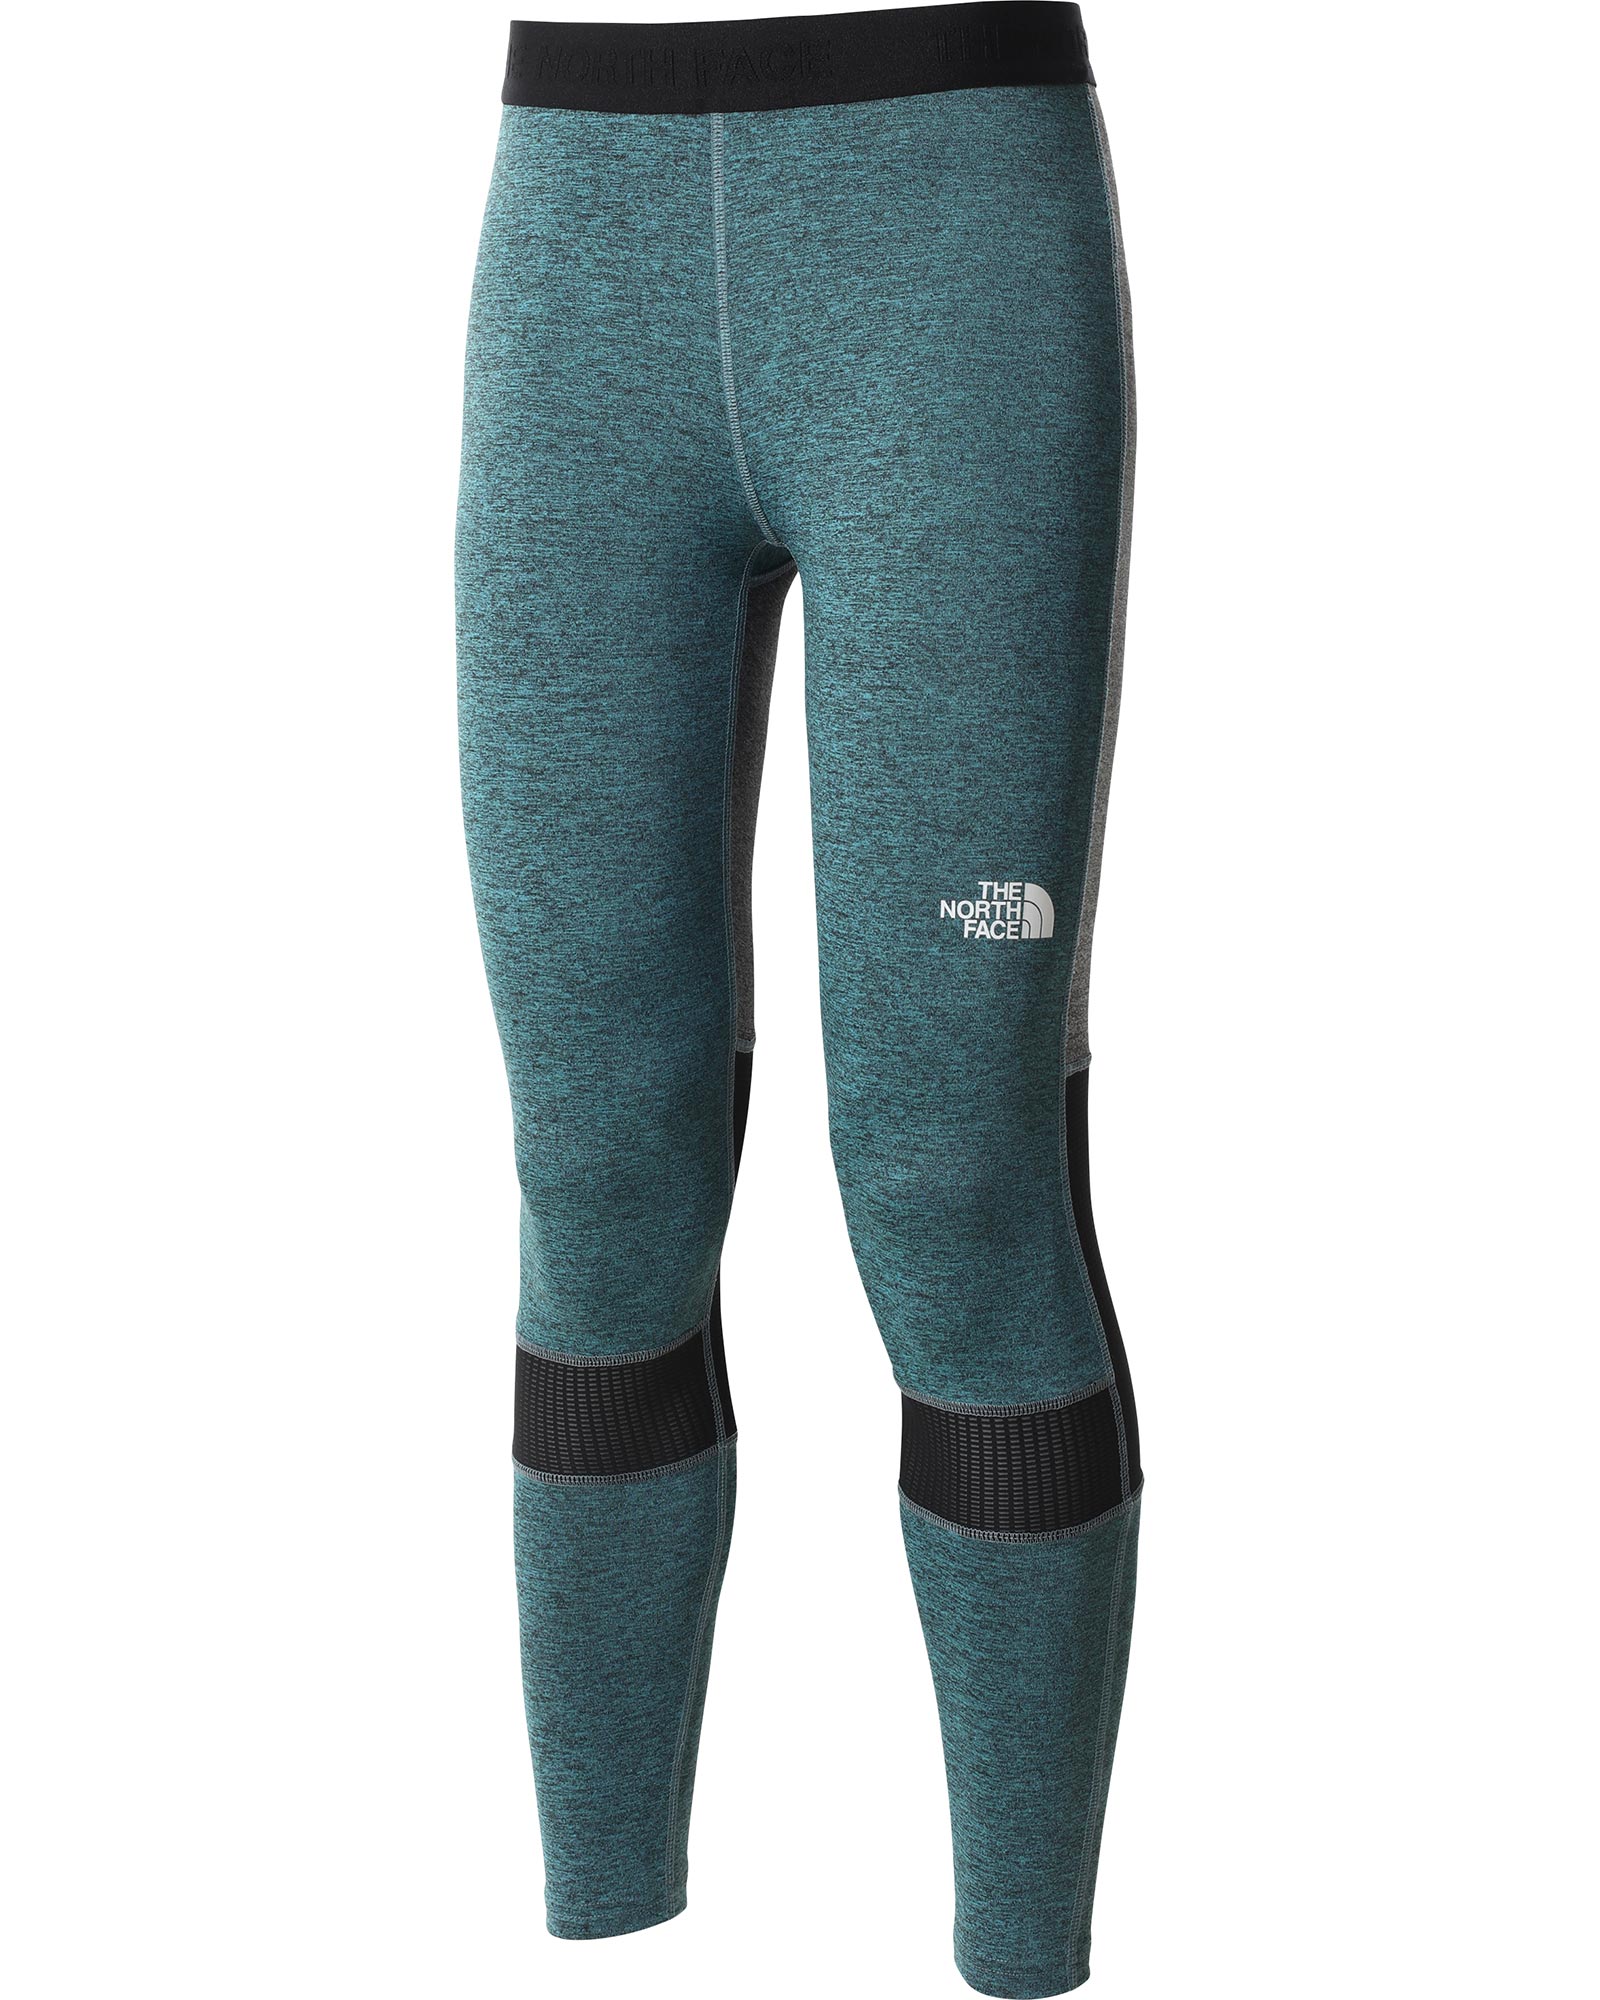 The North Face MA Women’s Tights - Goblin Blue Heather S